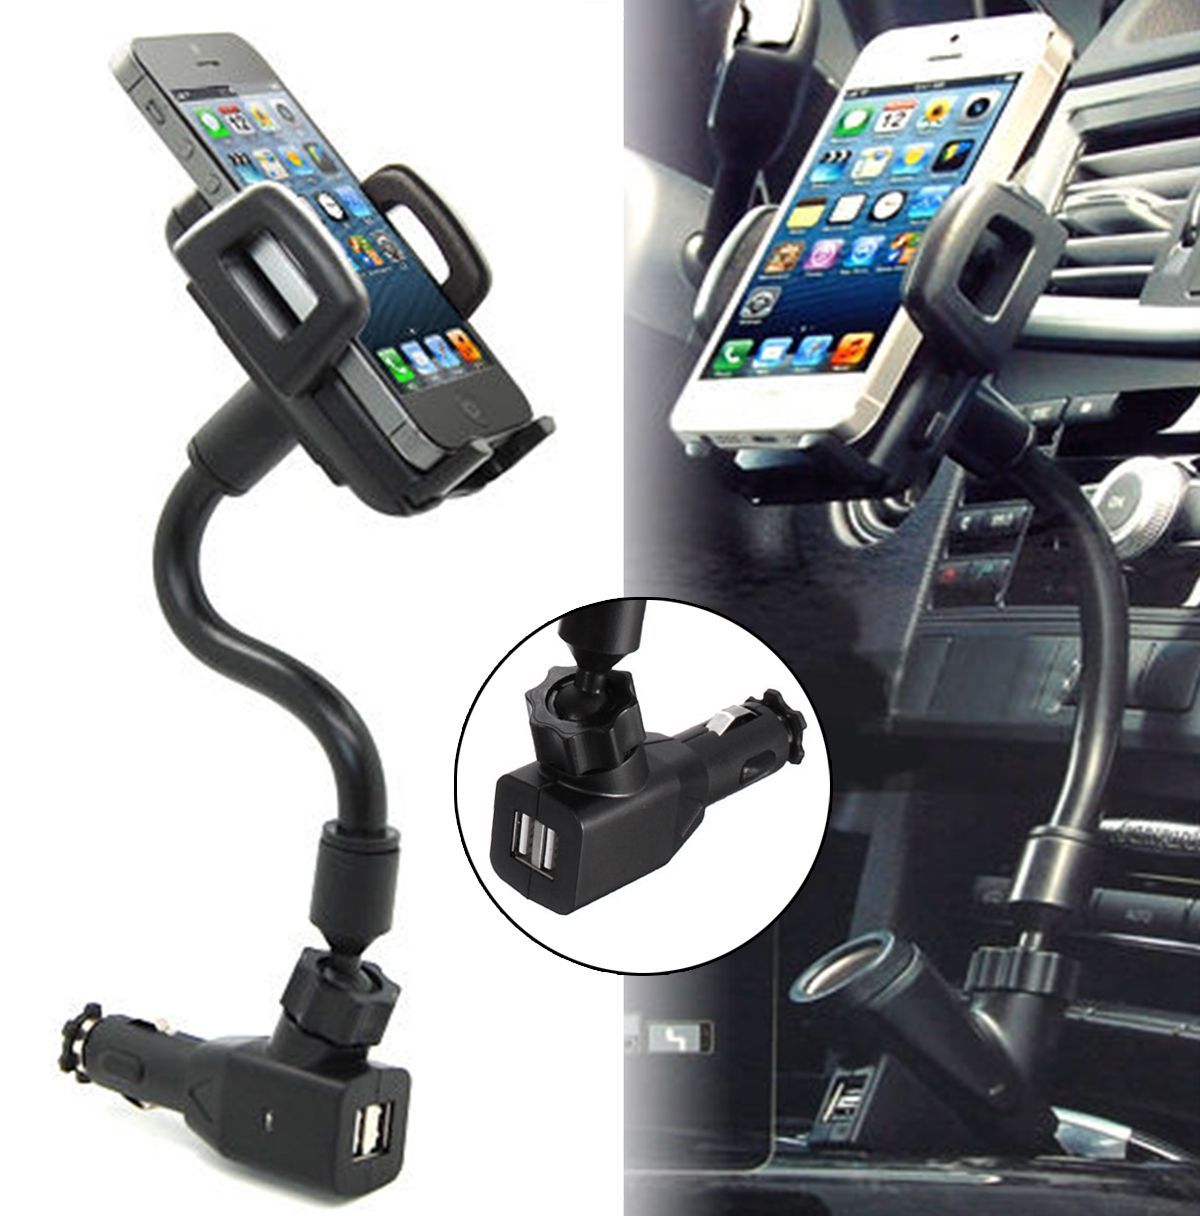 2-USB-Ports-Car-Charger-Stand-Mount-Holder-For-iPhone-5-5S-5C-956225